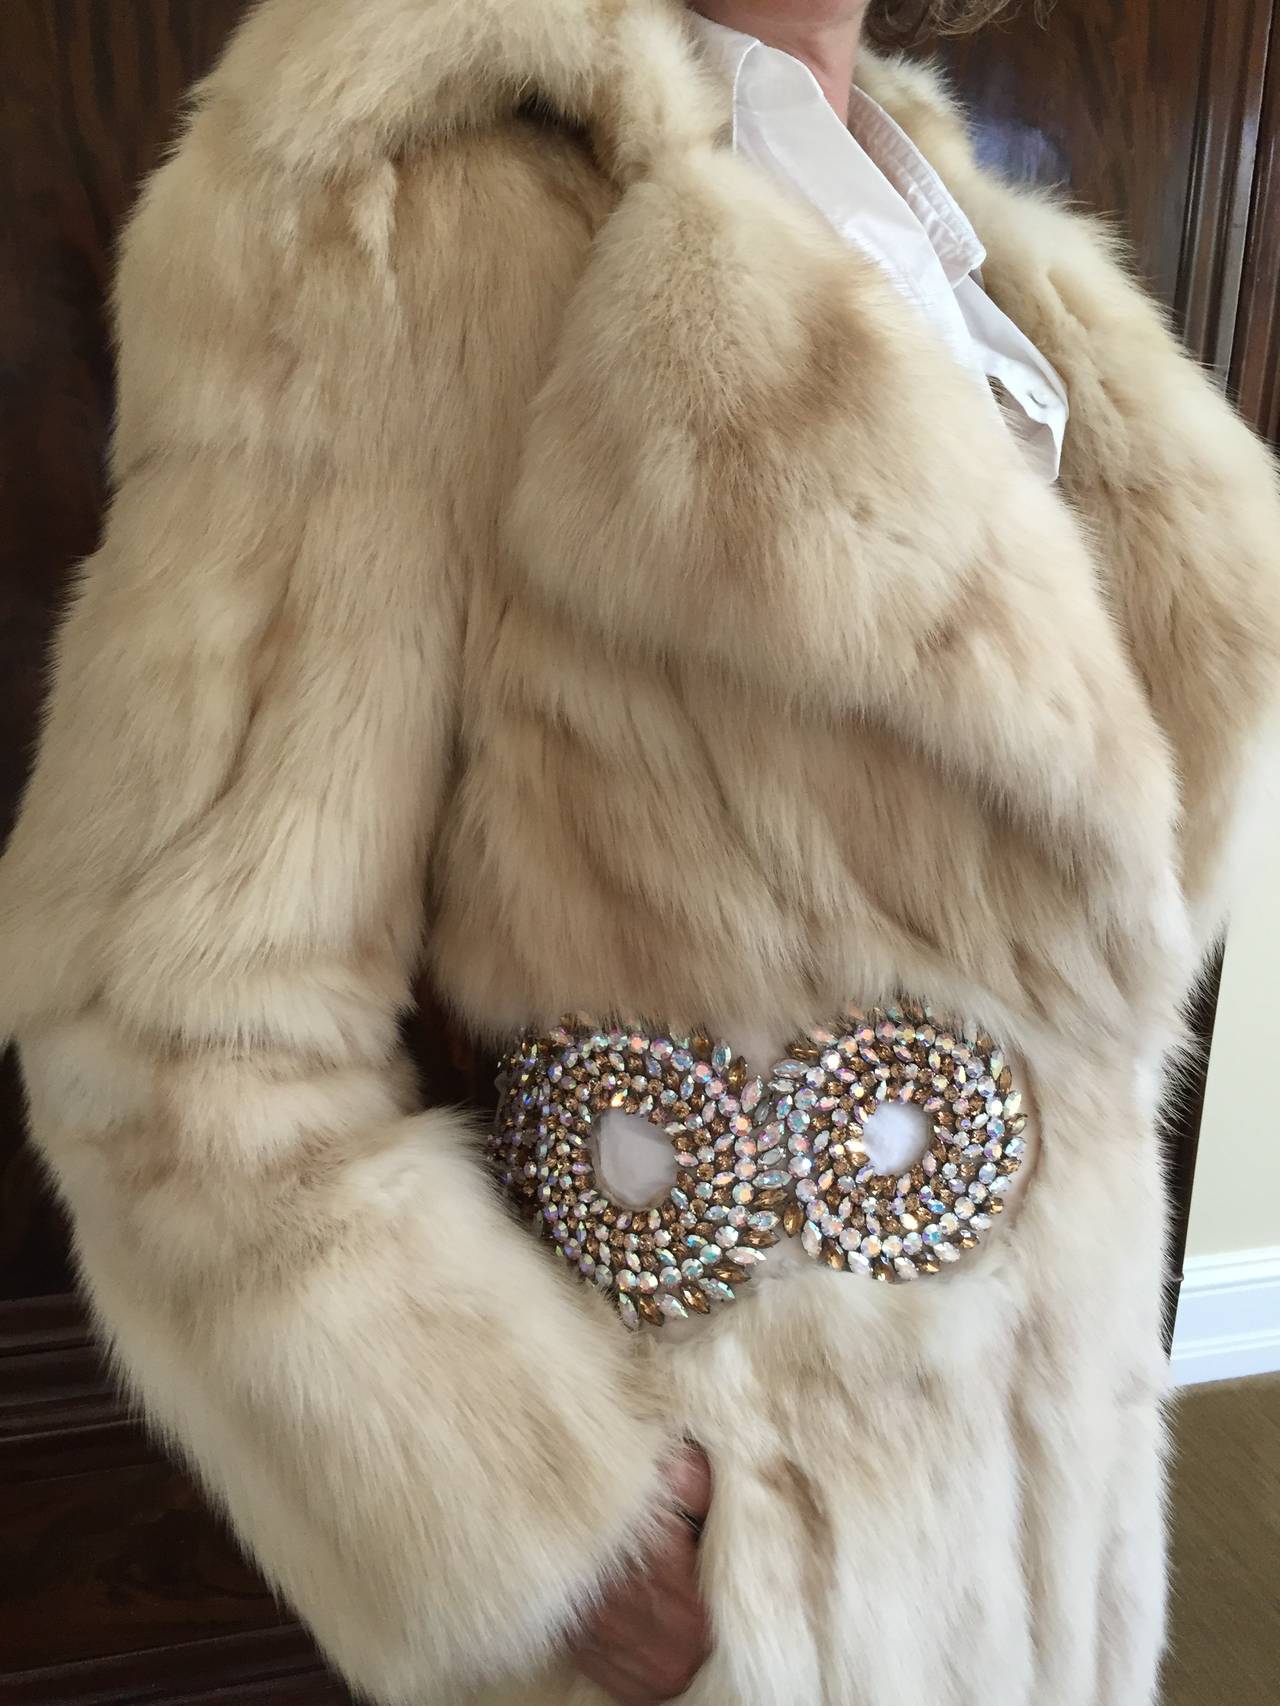 Luxurious Sable Fur Coat w. Wide Jeweled 